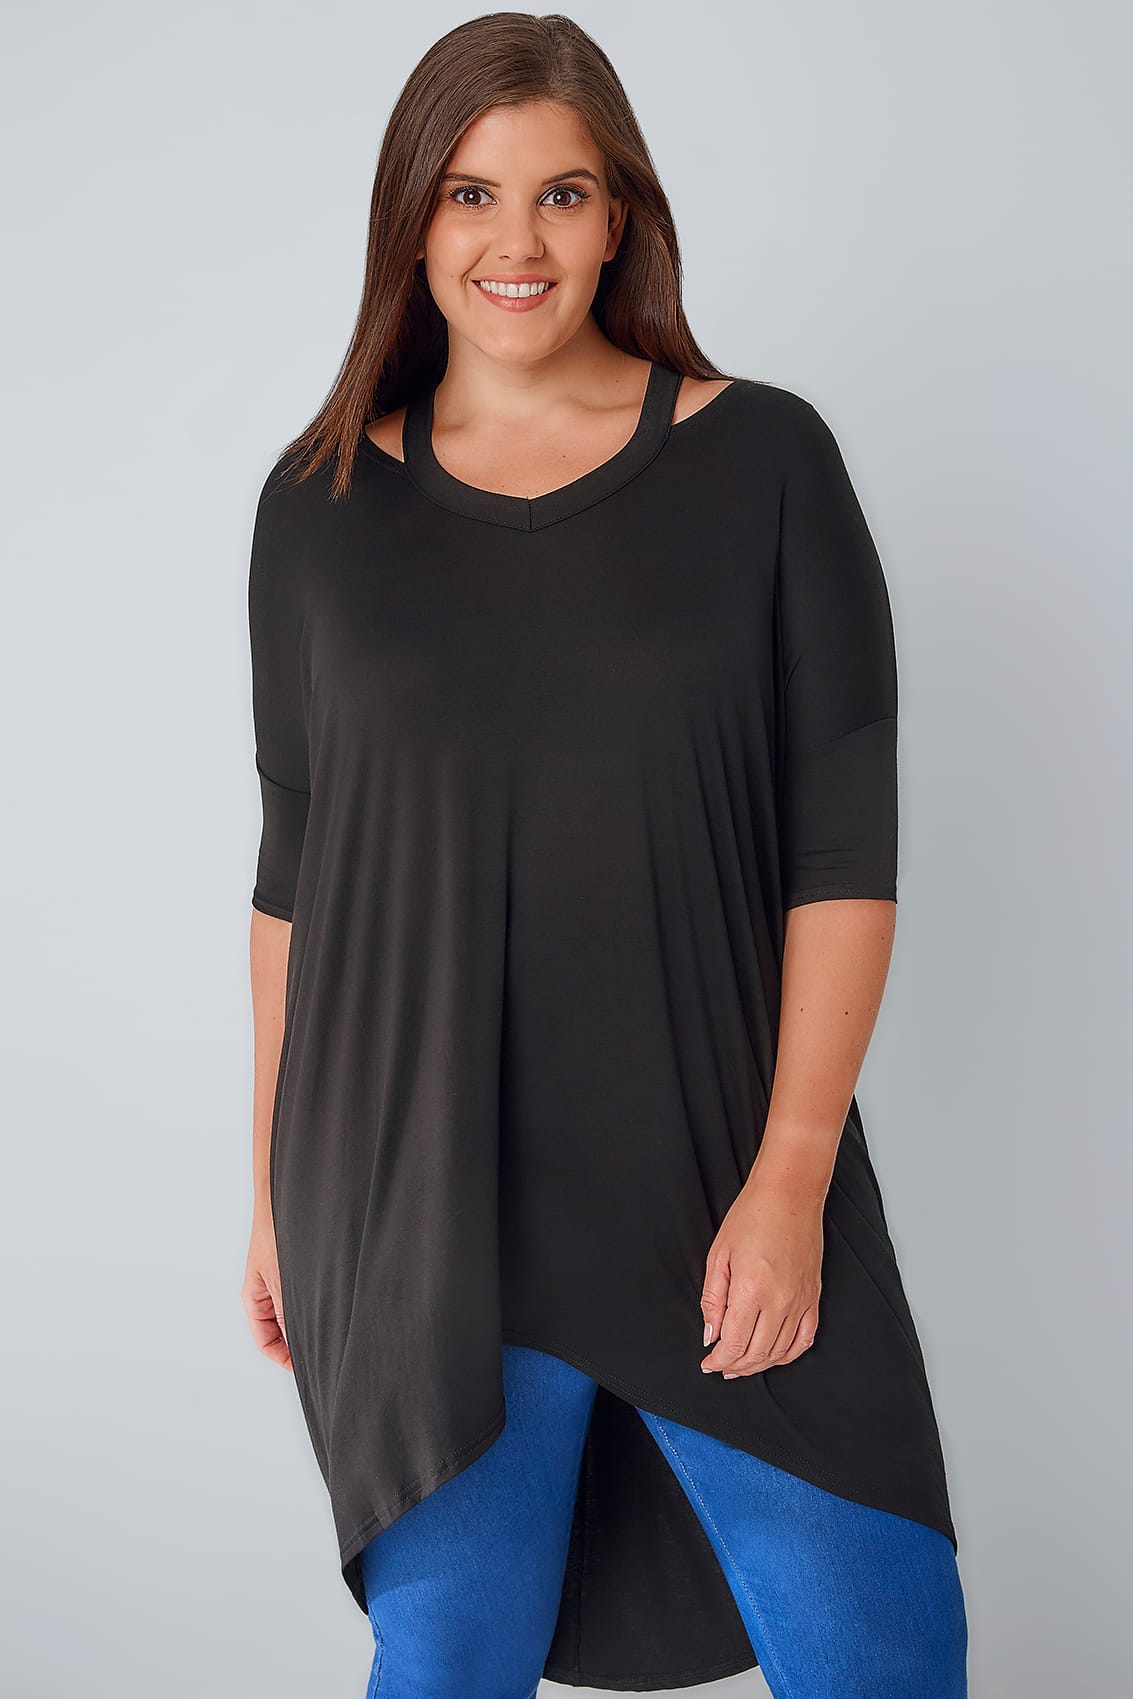 Black Split Neck Top With Extreme Dipped Hem, Plus size 16 to 36